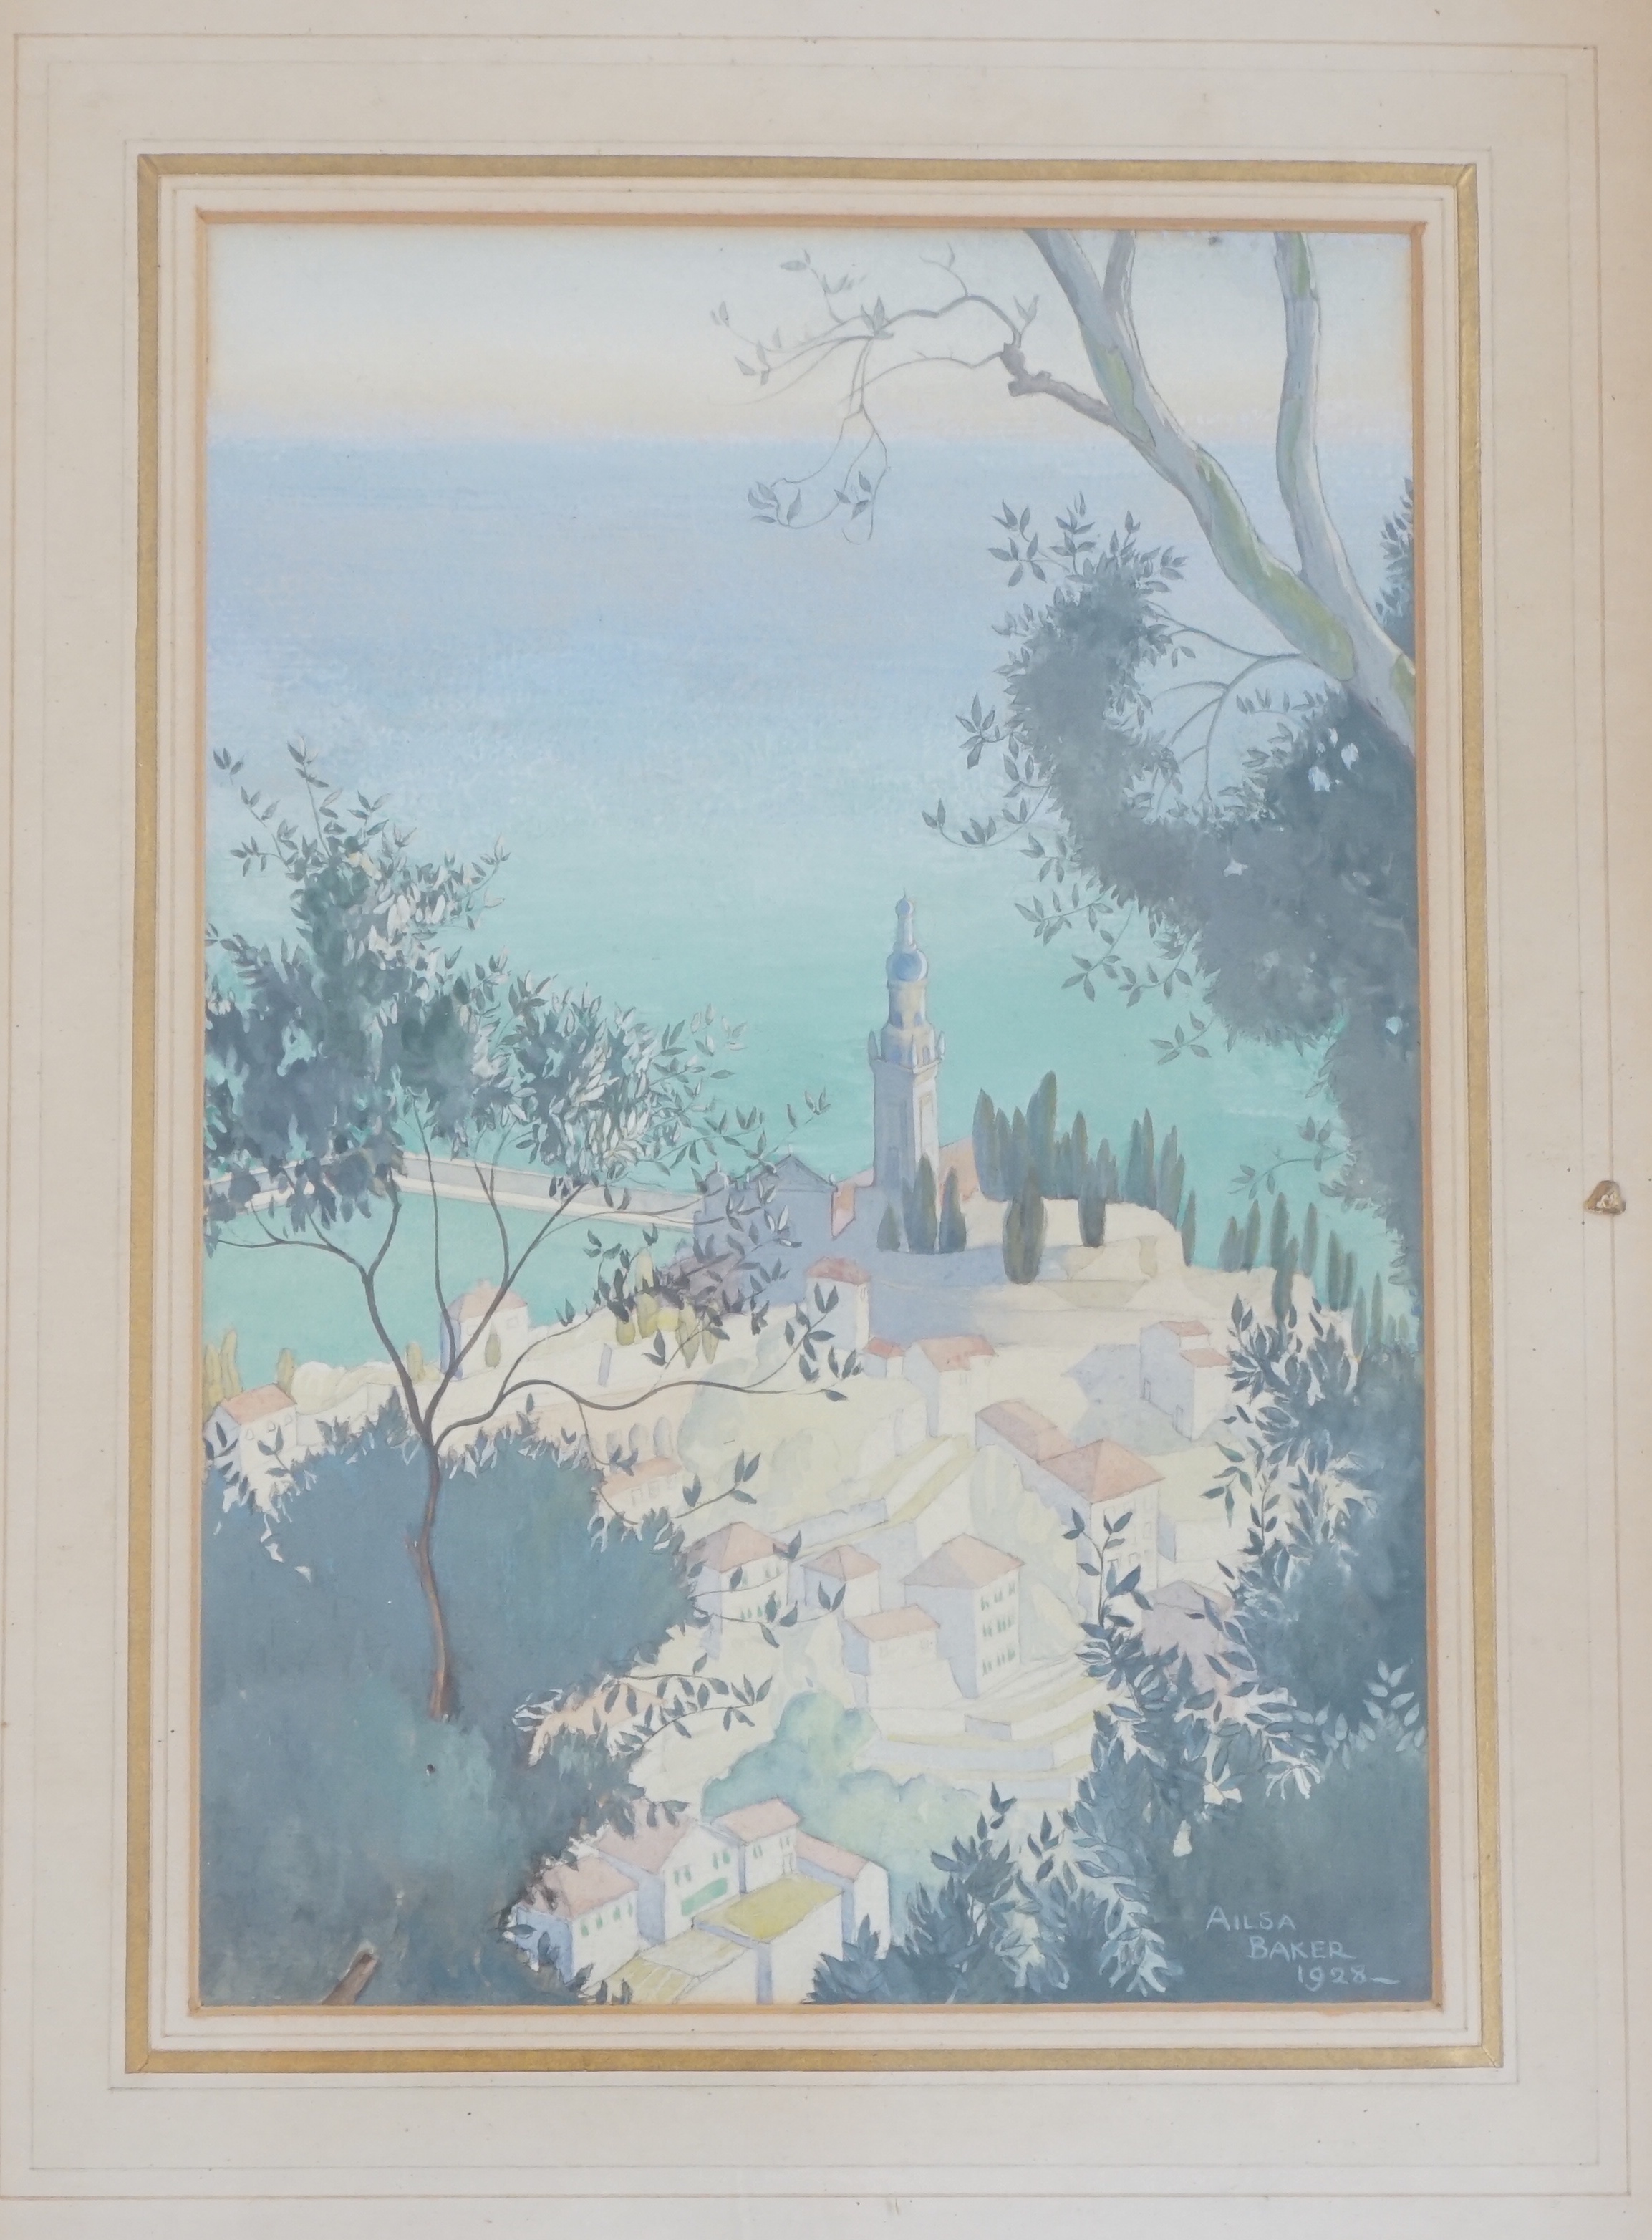 Ailsa Baker, gouache and watercolour, Mediterranean coastal town with church spire, signed and dated 1928, 26 x 18cm